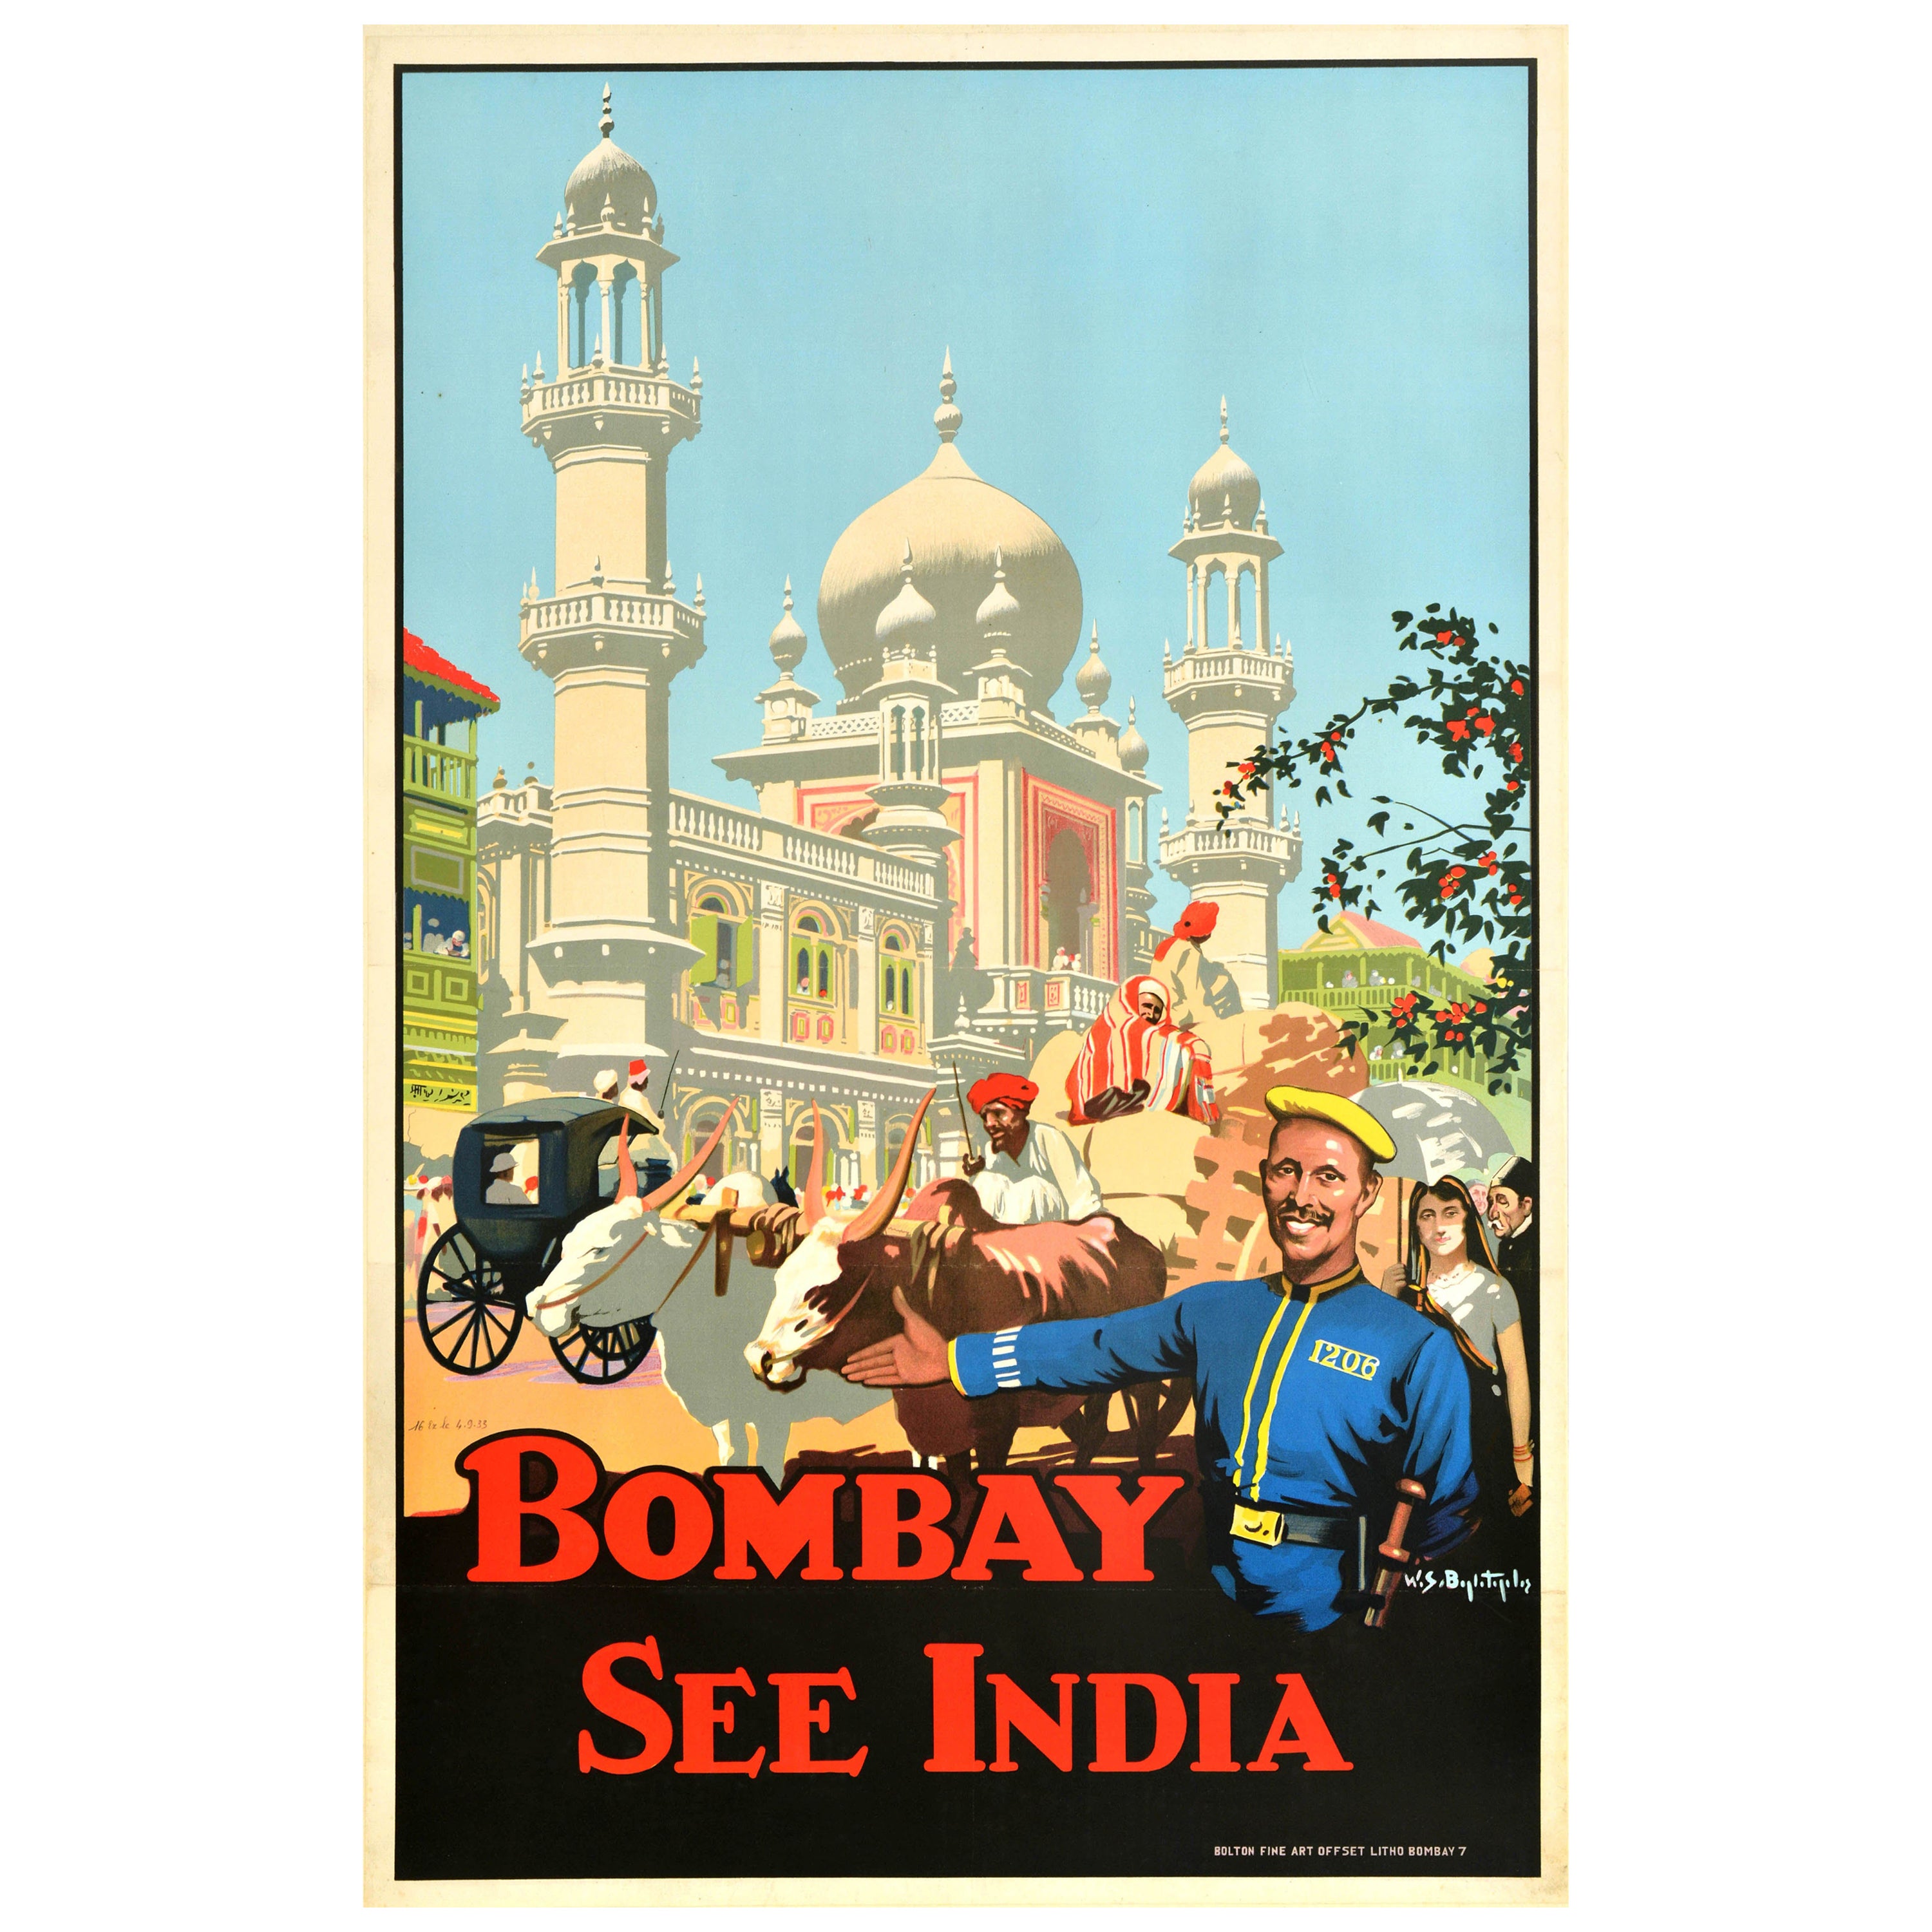 Original Vintage Travel Poster Bombay See India Mumbai Old Temple Street Design For Sale